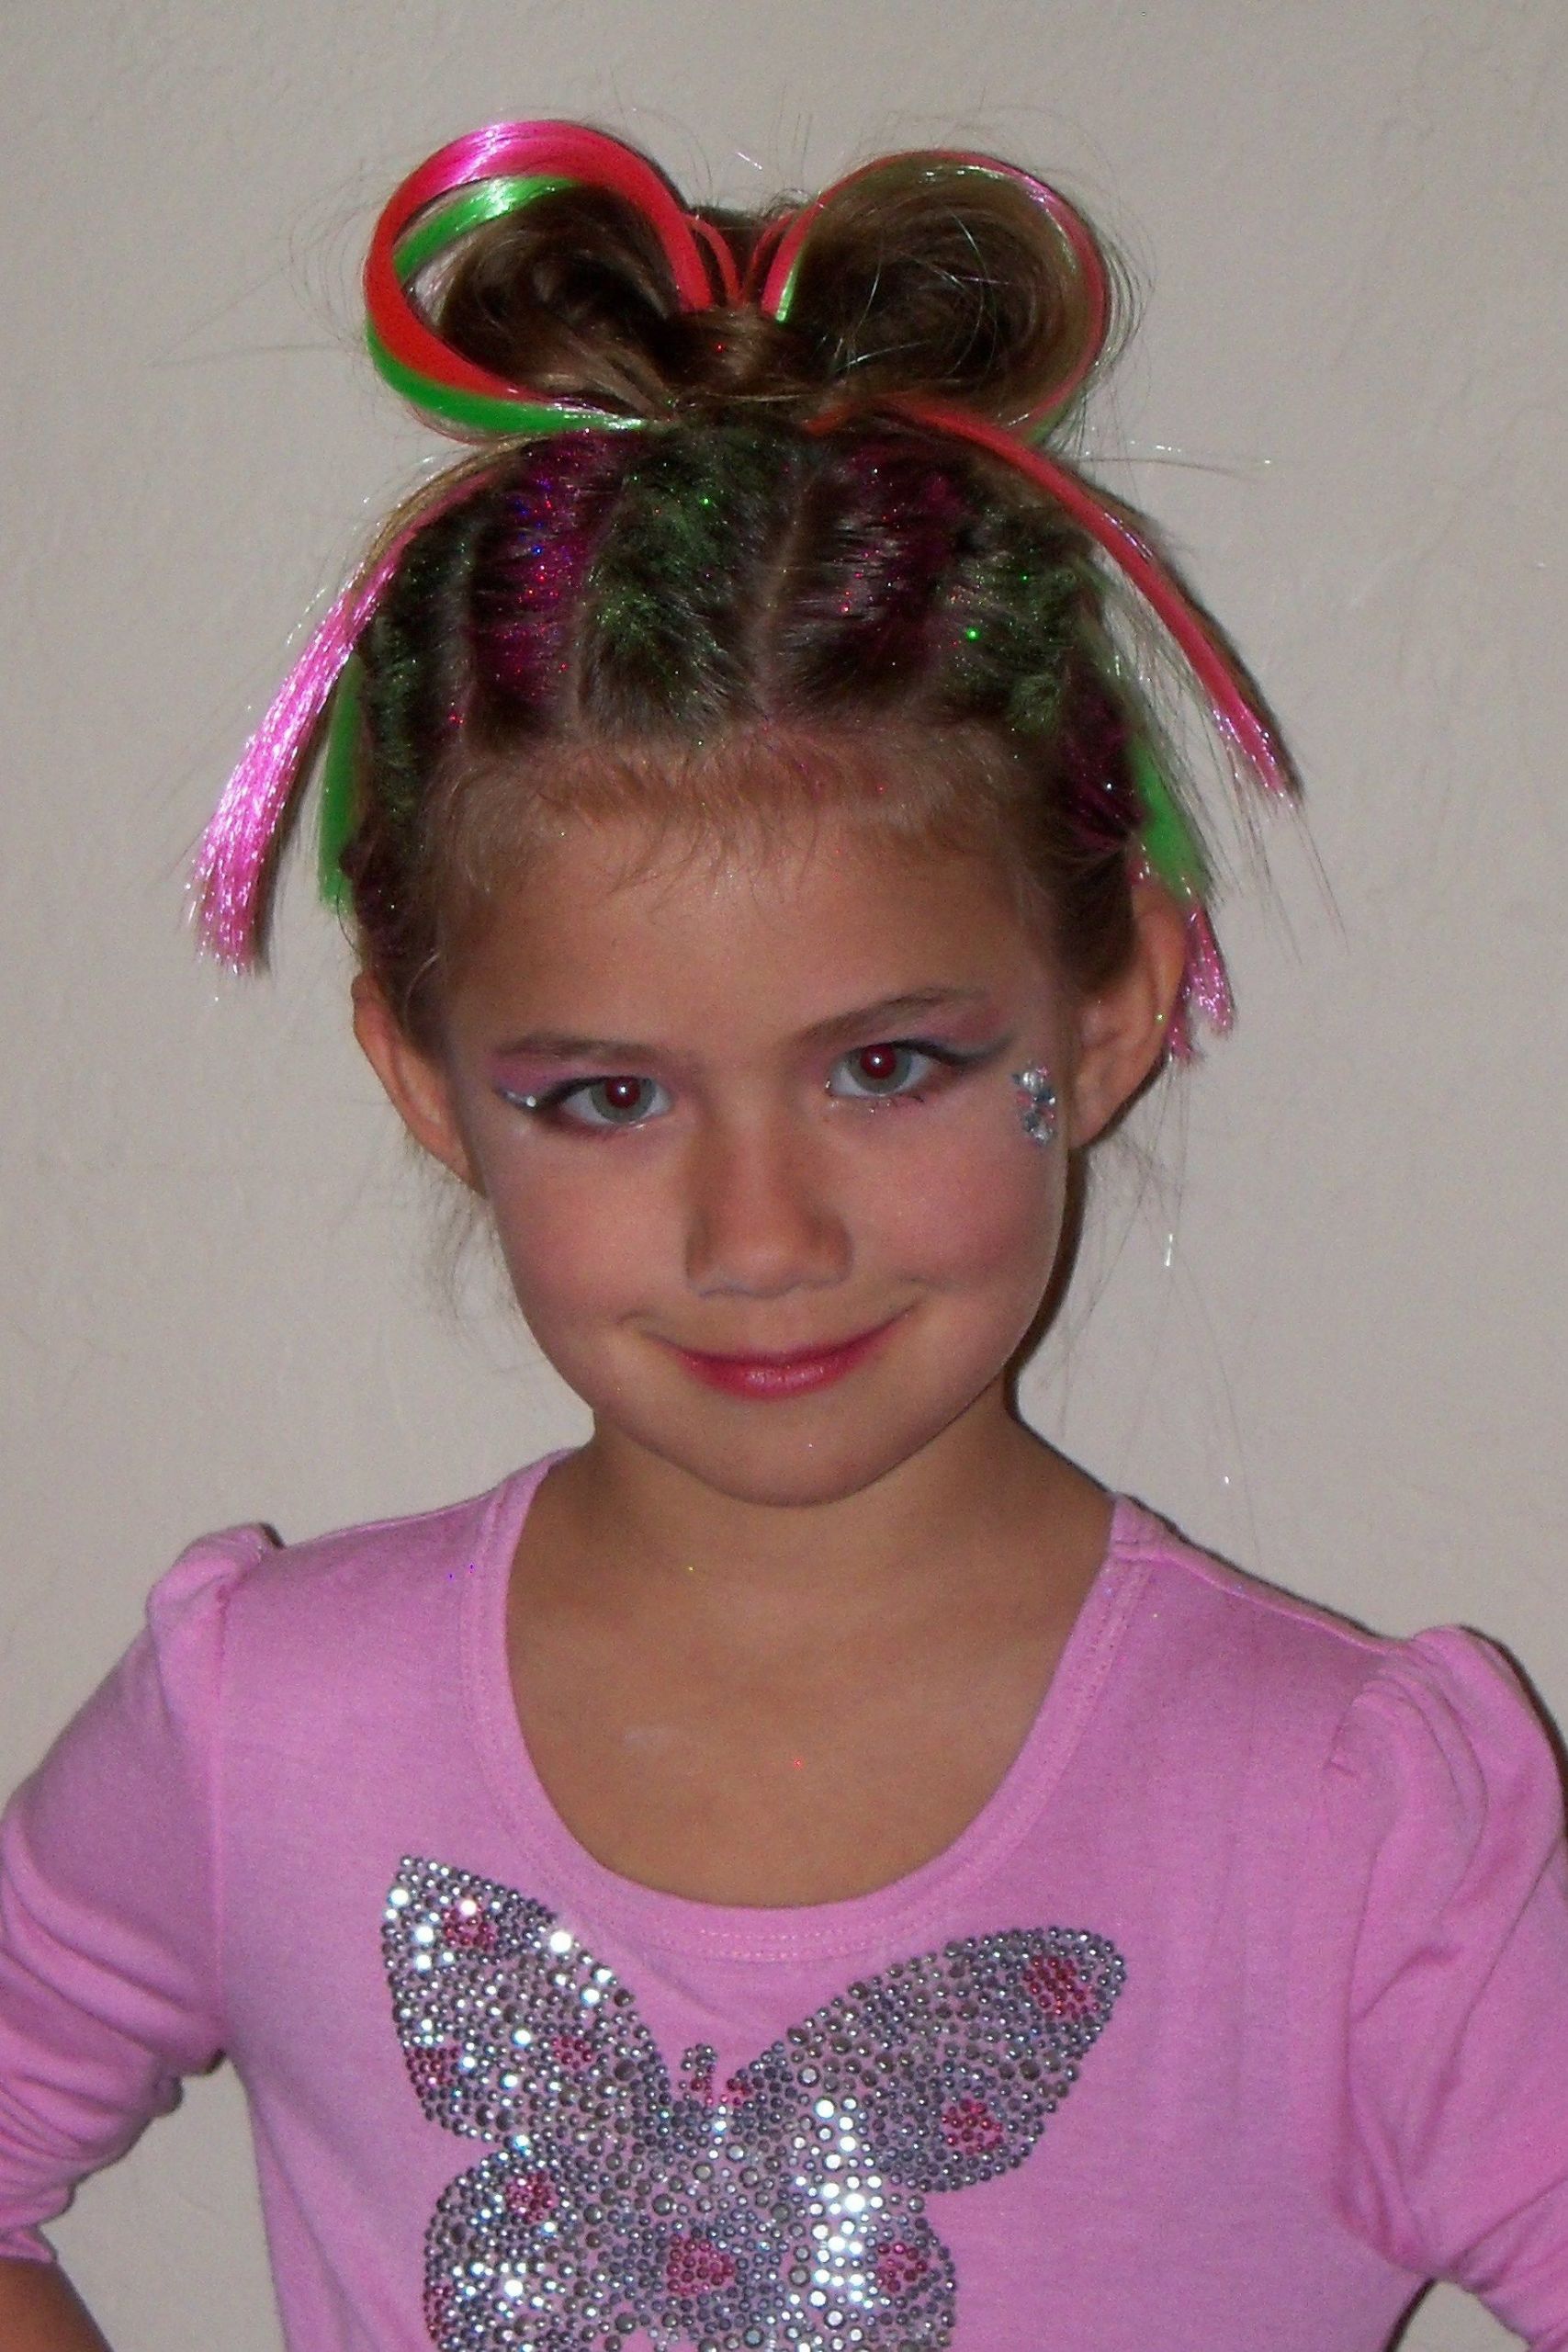 Star Hairstyle For Little Girl
 Rock Star Hair